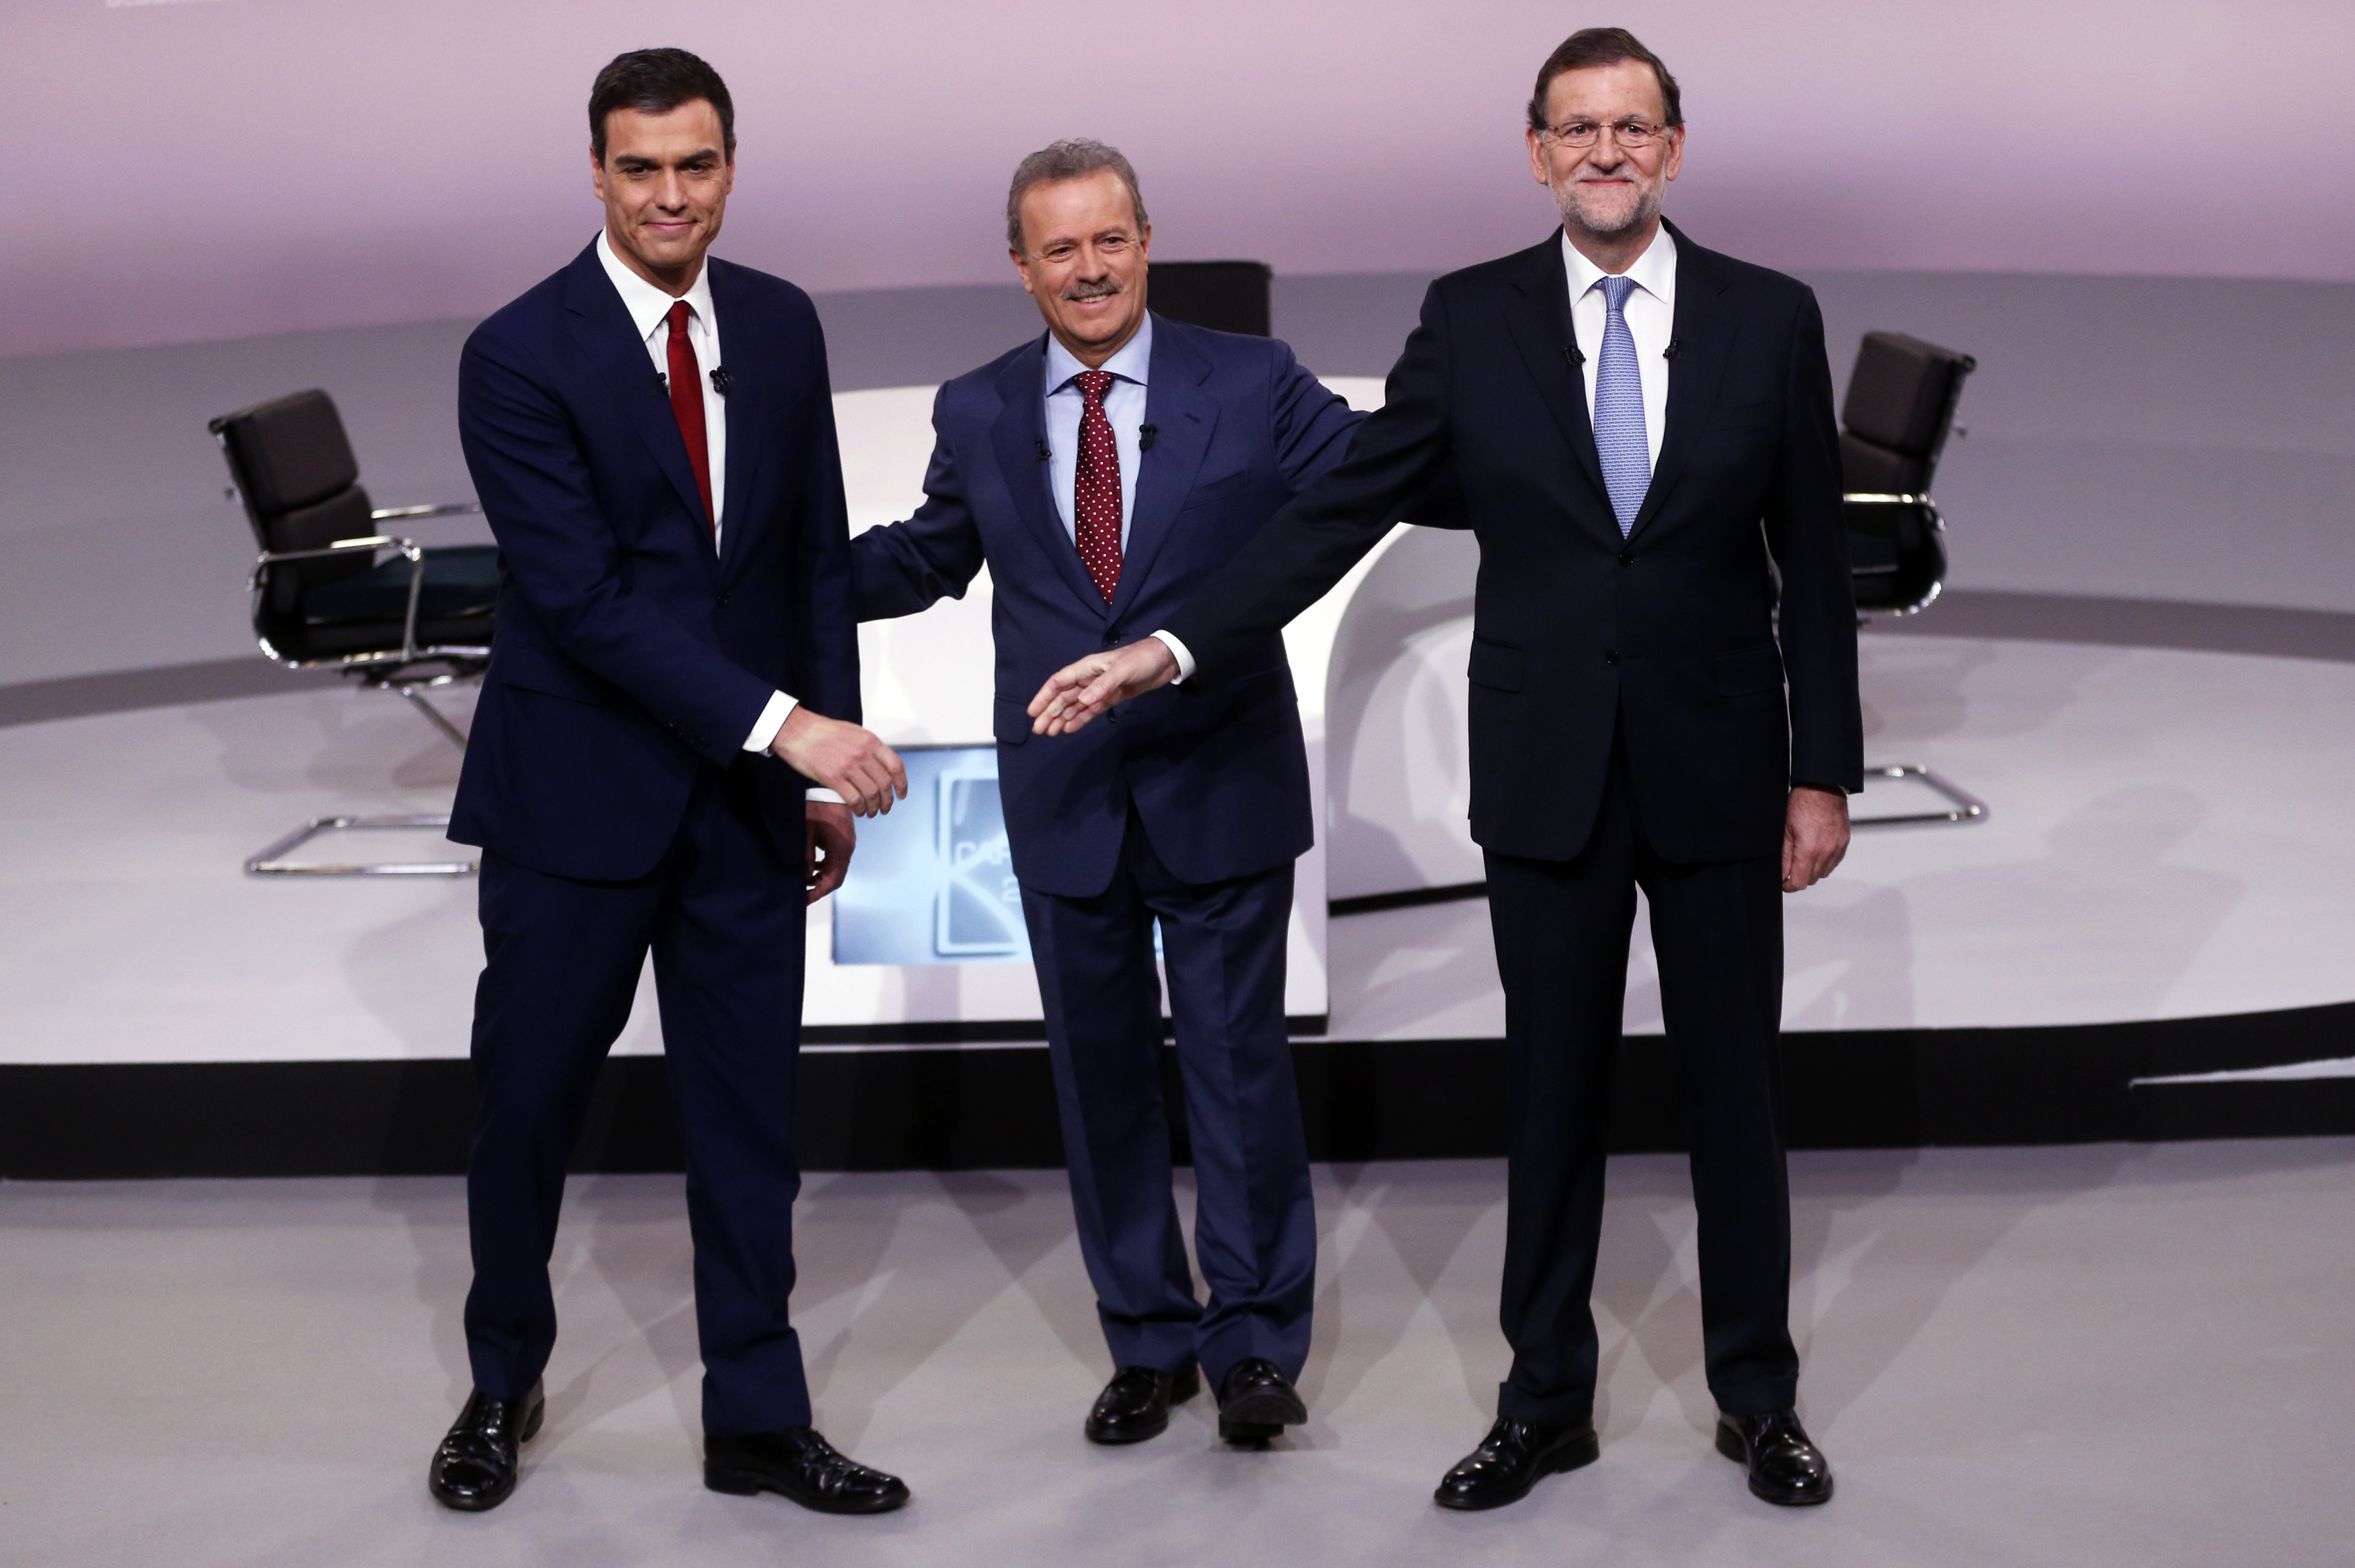 Spain's Prime Minister and ruling People's Party (PP) leader Mariano Rajoy (R) and Socialist leader Pedro Sanchez stand as host Manuel Campo Vidal (C) looks on before a live televised debate in Madrid, Spain, December 14, 2015.   REUTERS/Juan Medina - RTX1YOJL